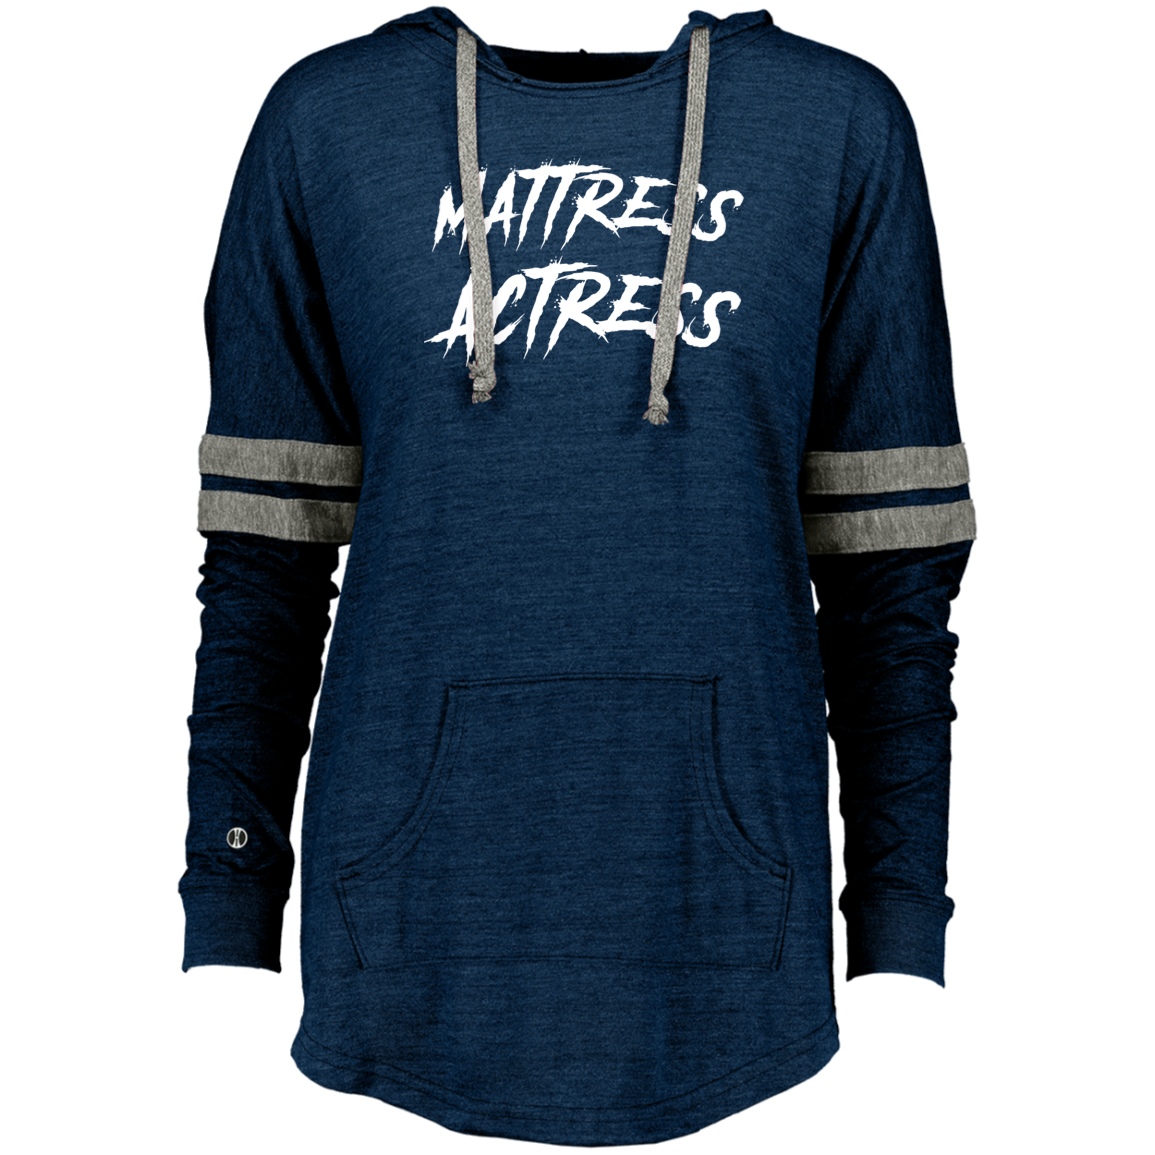 "Mattress Actress" Ladies Hooded Low Key Pullover